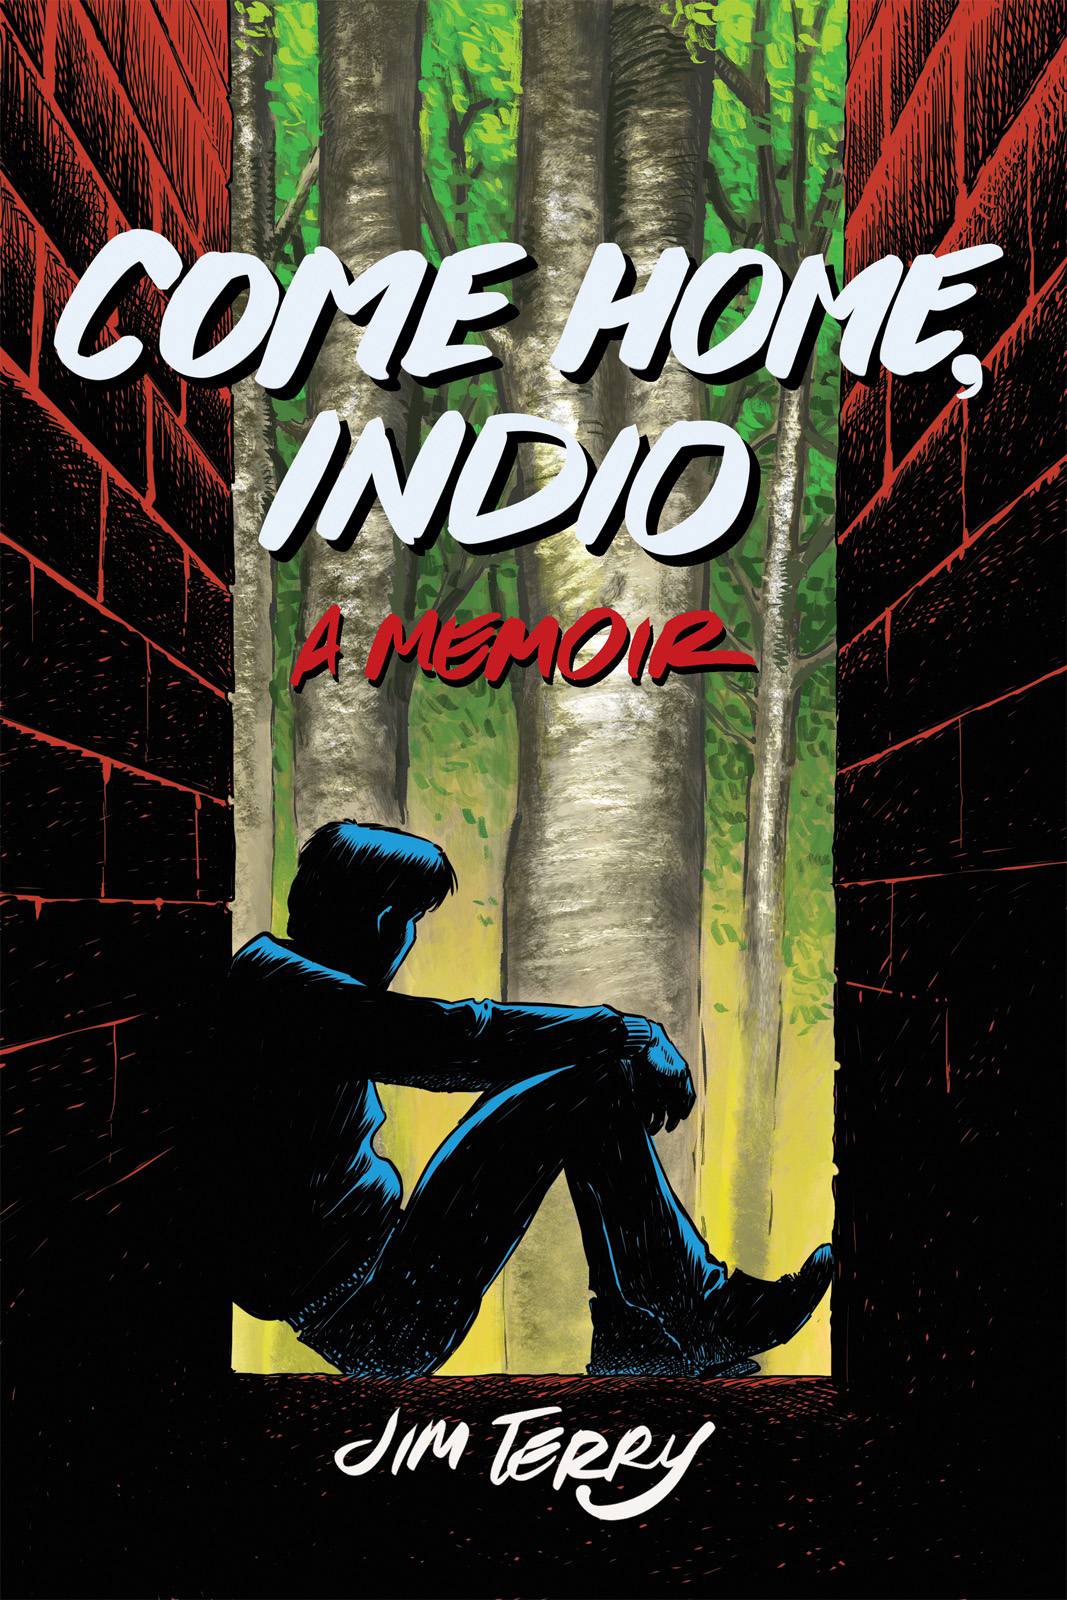 The cover of Come Home, Indio, a graphic novel memoir by Jim Terry, features an outline of a man sitting in-between two brick walls.